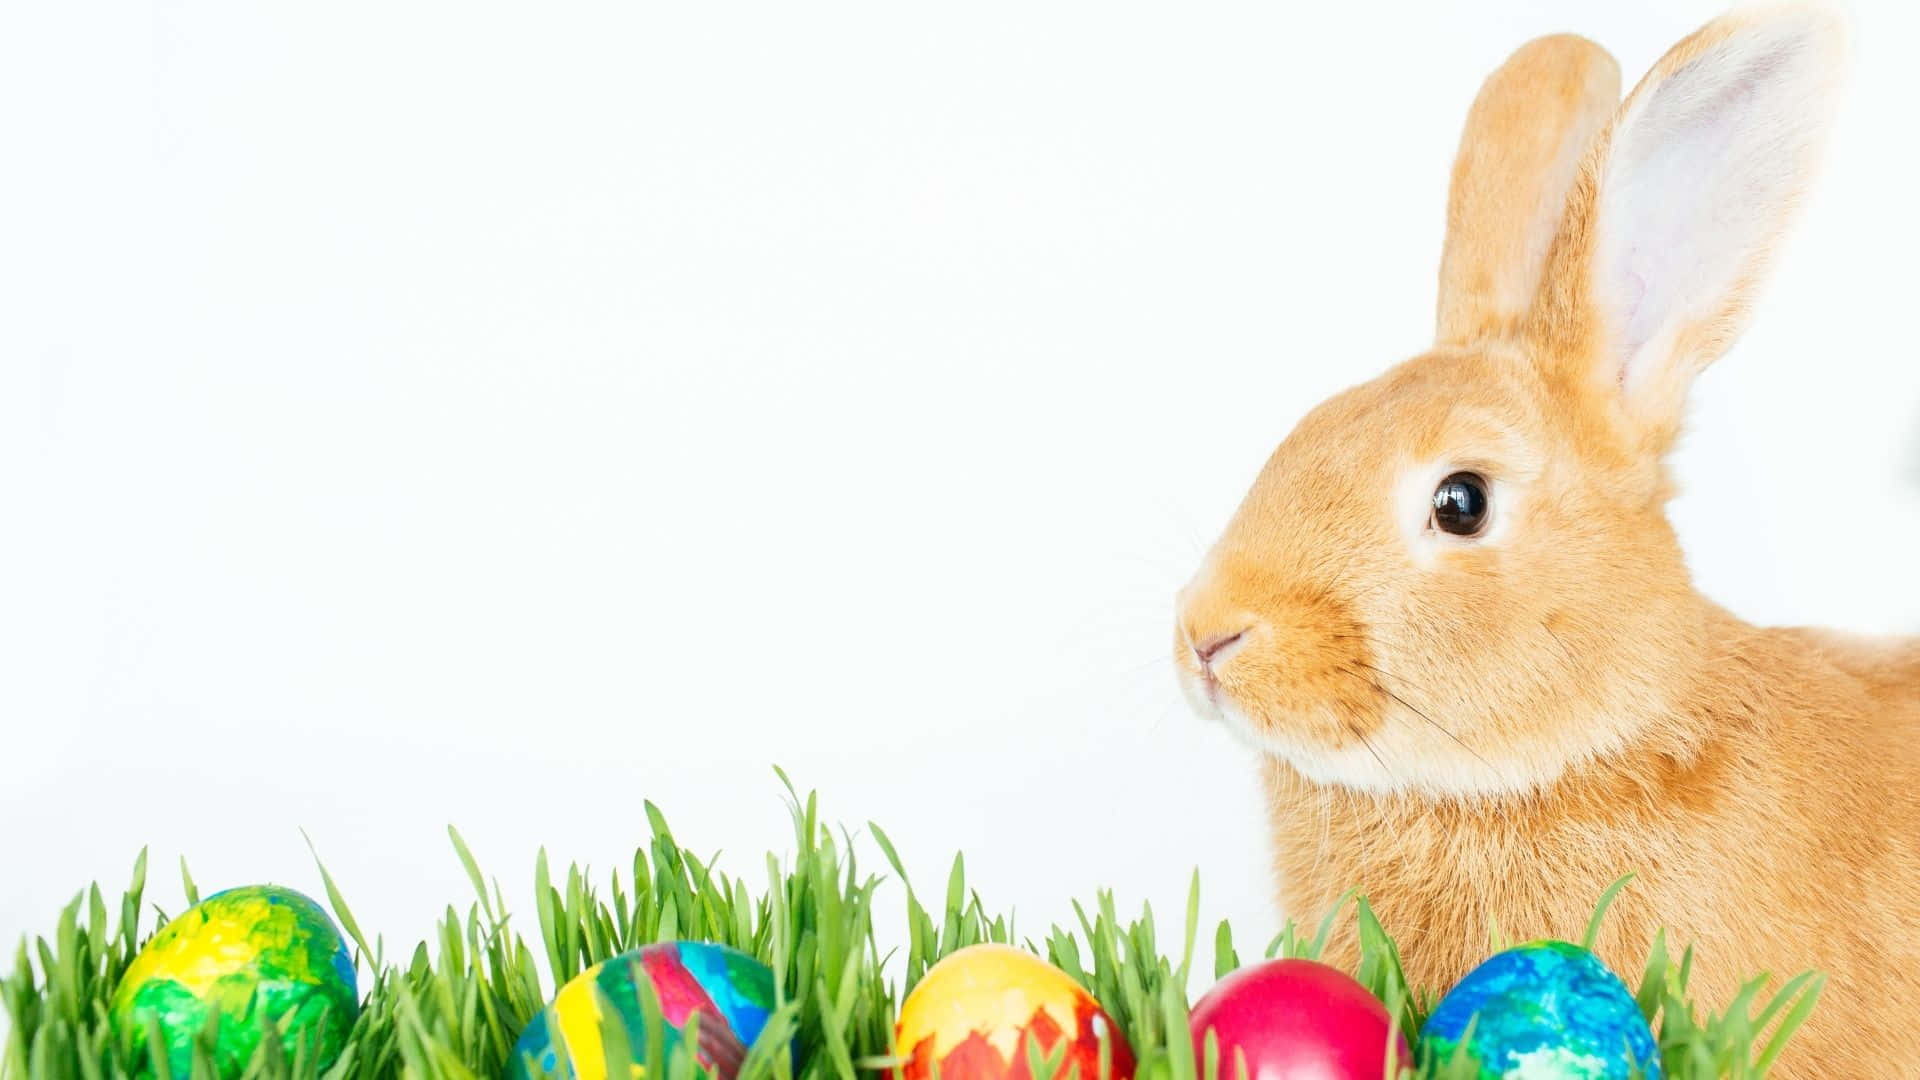 "Spread love and joy this holiday season with the Easter Bunny!" Wallpaper